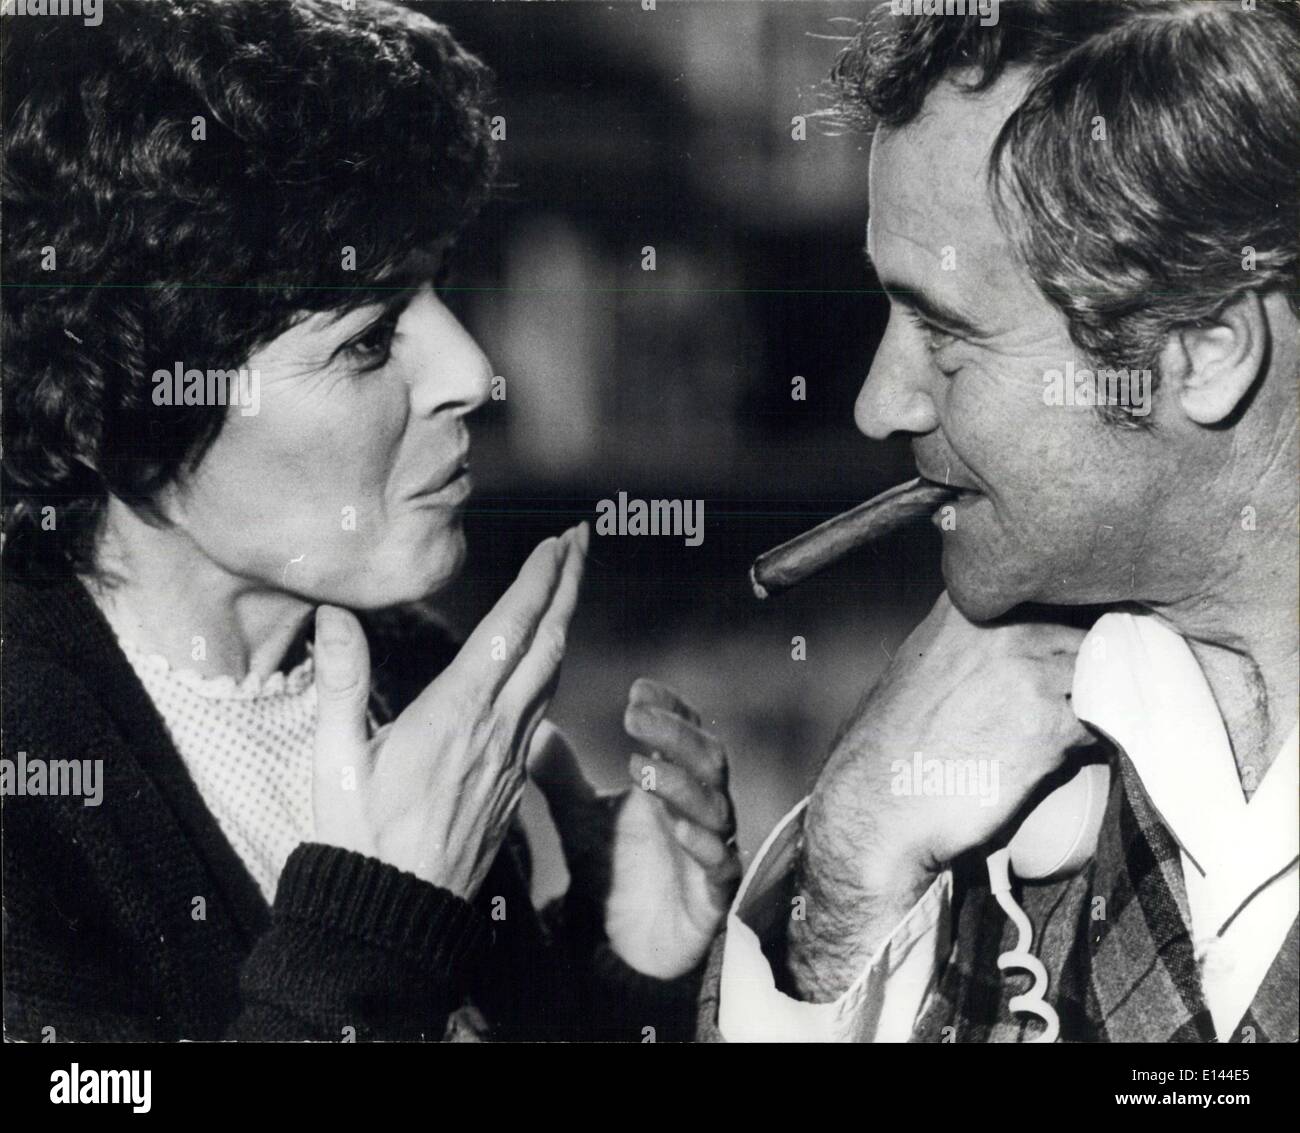 Apr. 04, 2012 - A Tip For Jack From Anne: Latest picture in the busy film career of Jack Lemmon is ''The Prisoner of Second Avenue'', described as a story about a harassed New Yorker. He is seen here discussing his role with co-star Anne Bancroft, who plays the part of his wife. It is Lemmon's 31st film role. Stock Photo